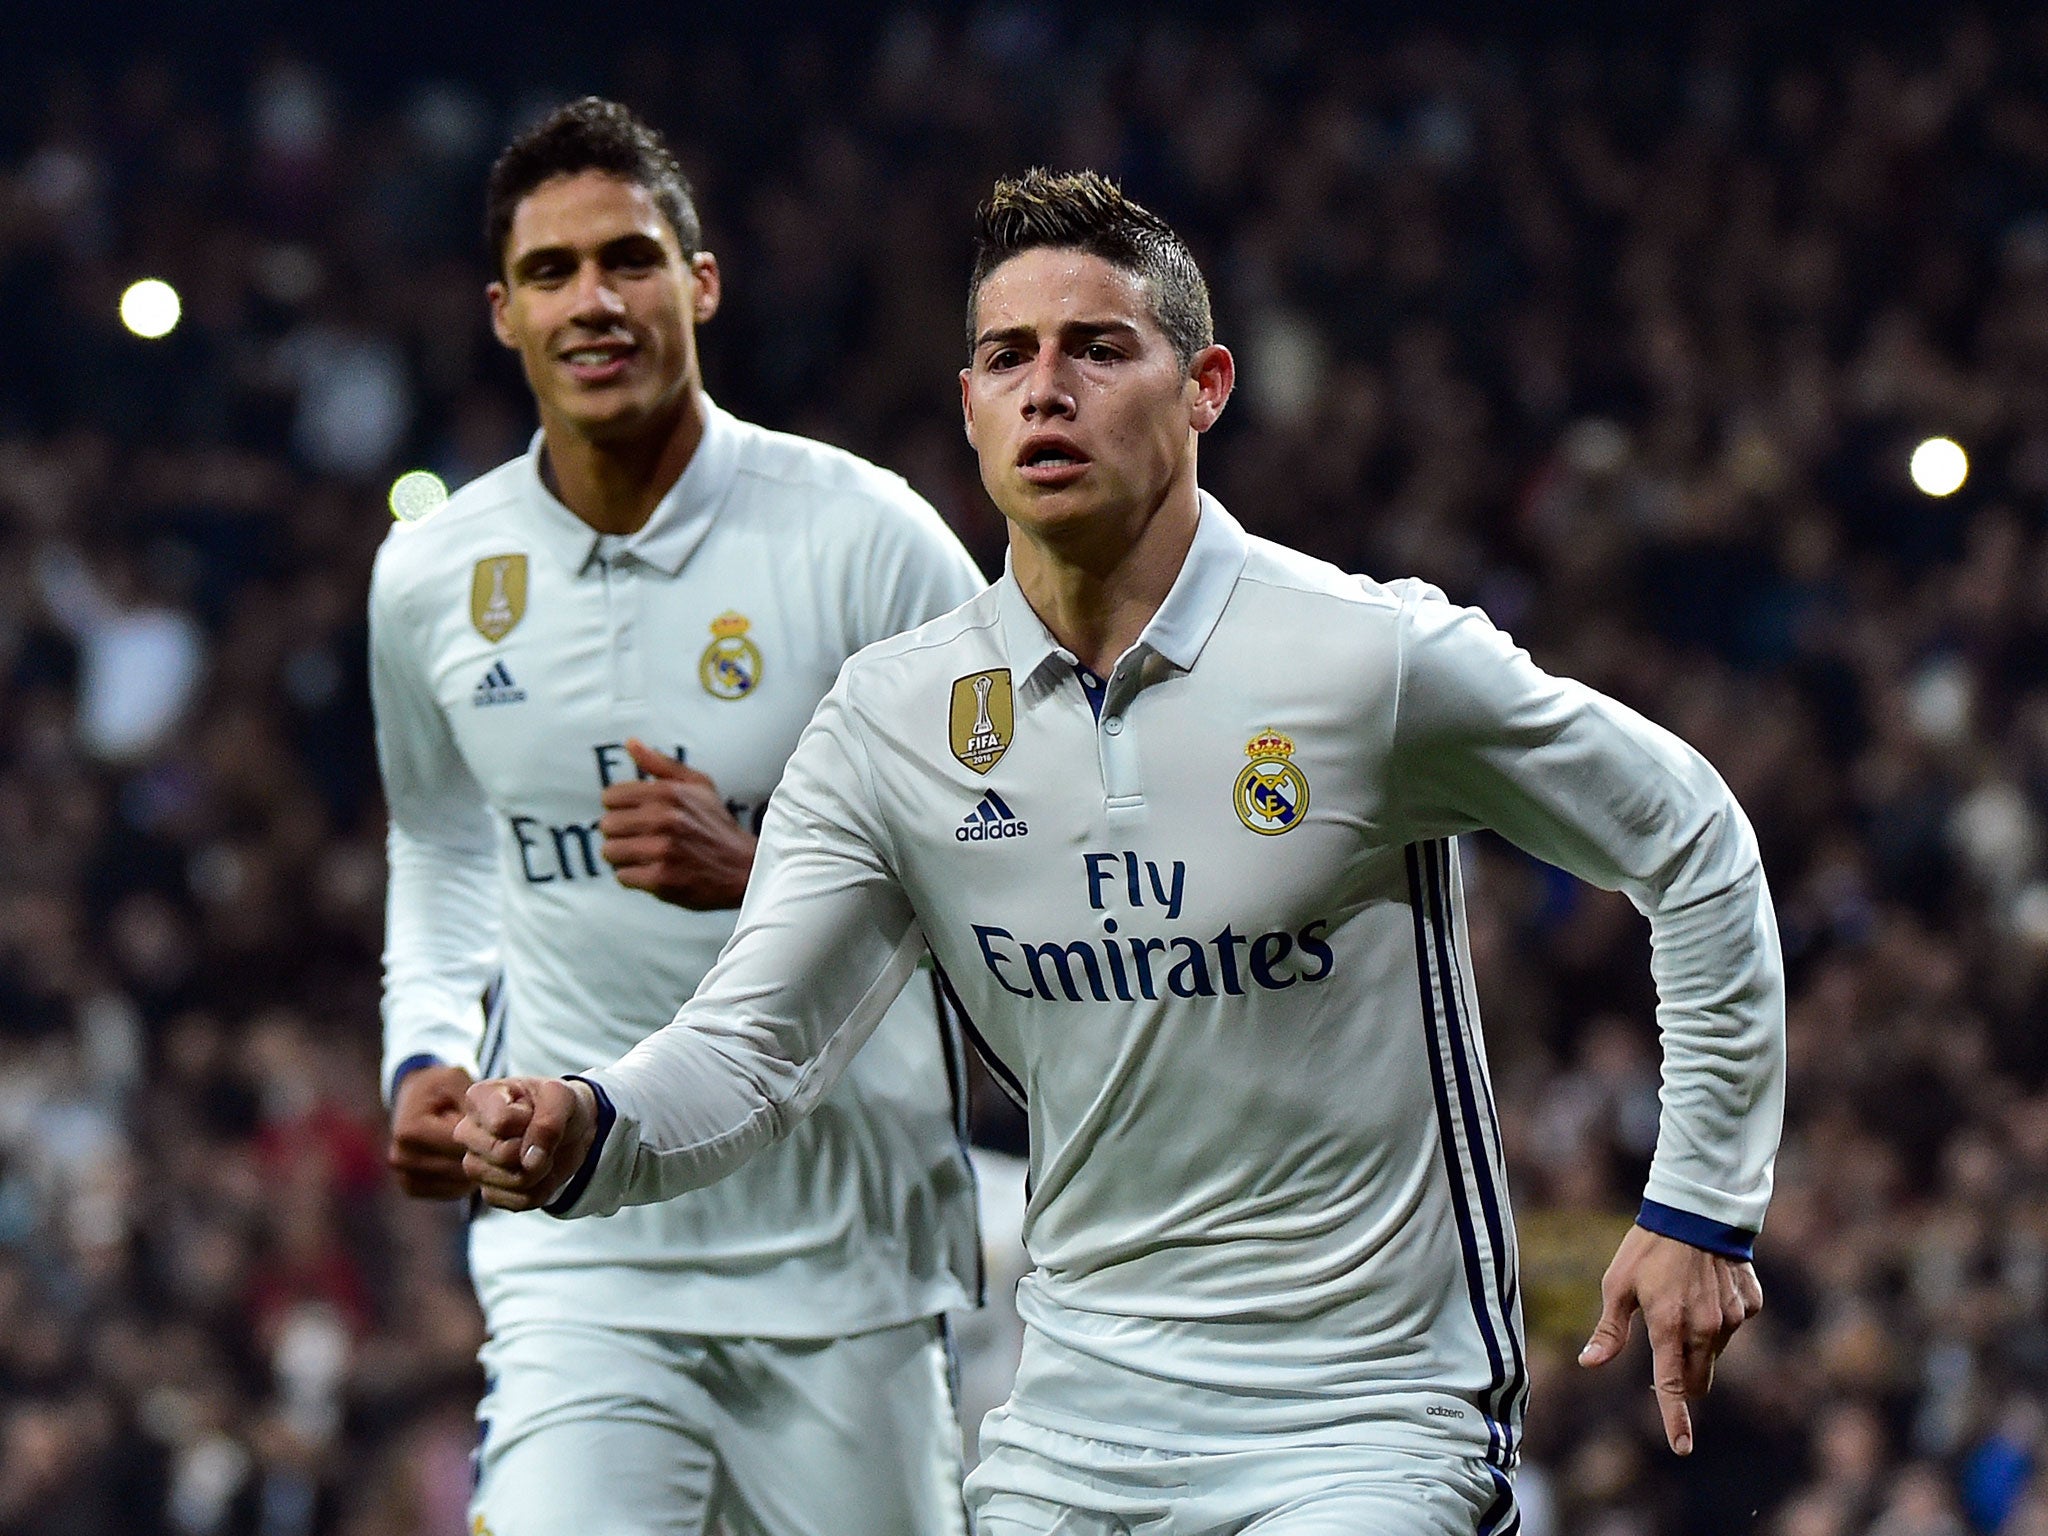 James Rodriguez continues to be linked with a move to United